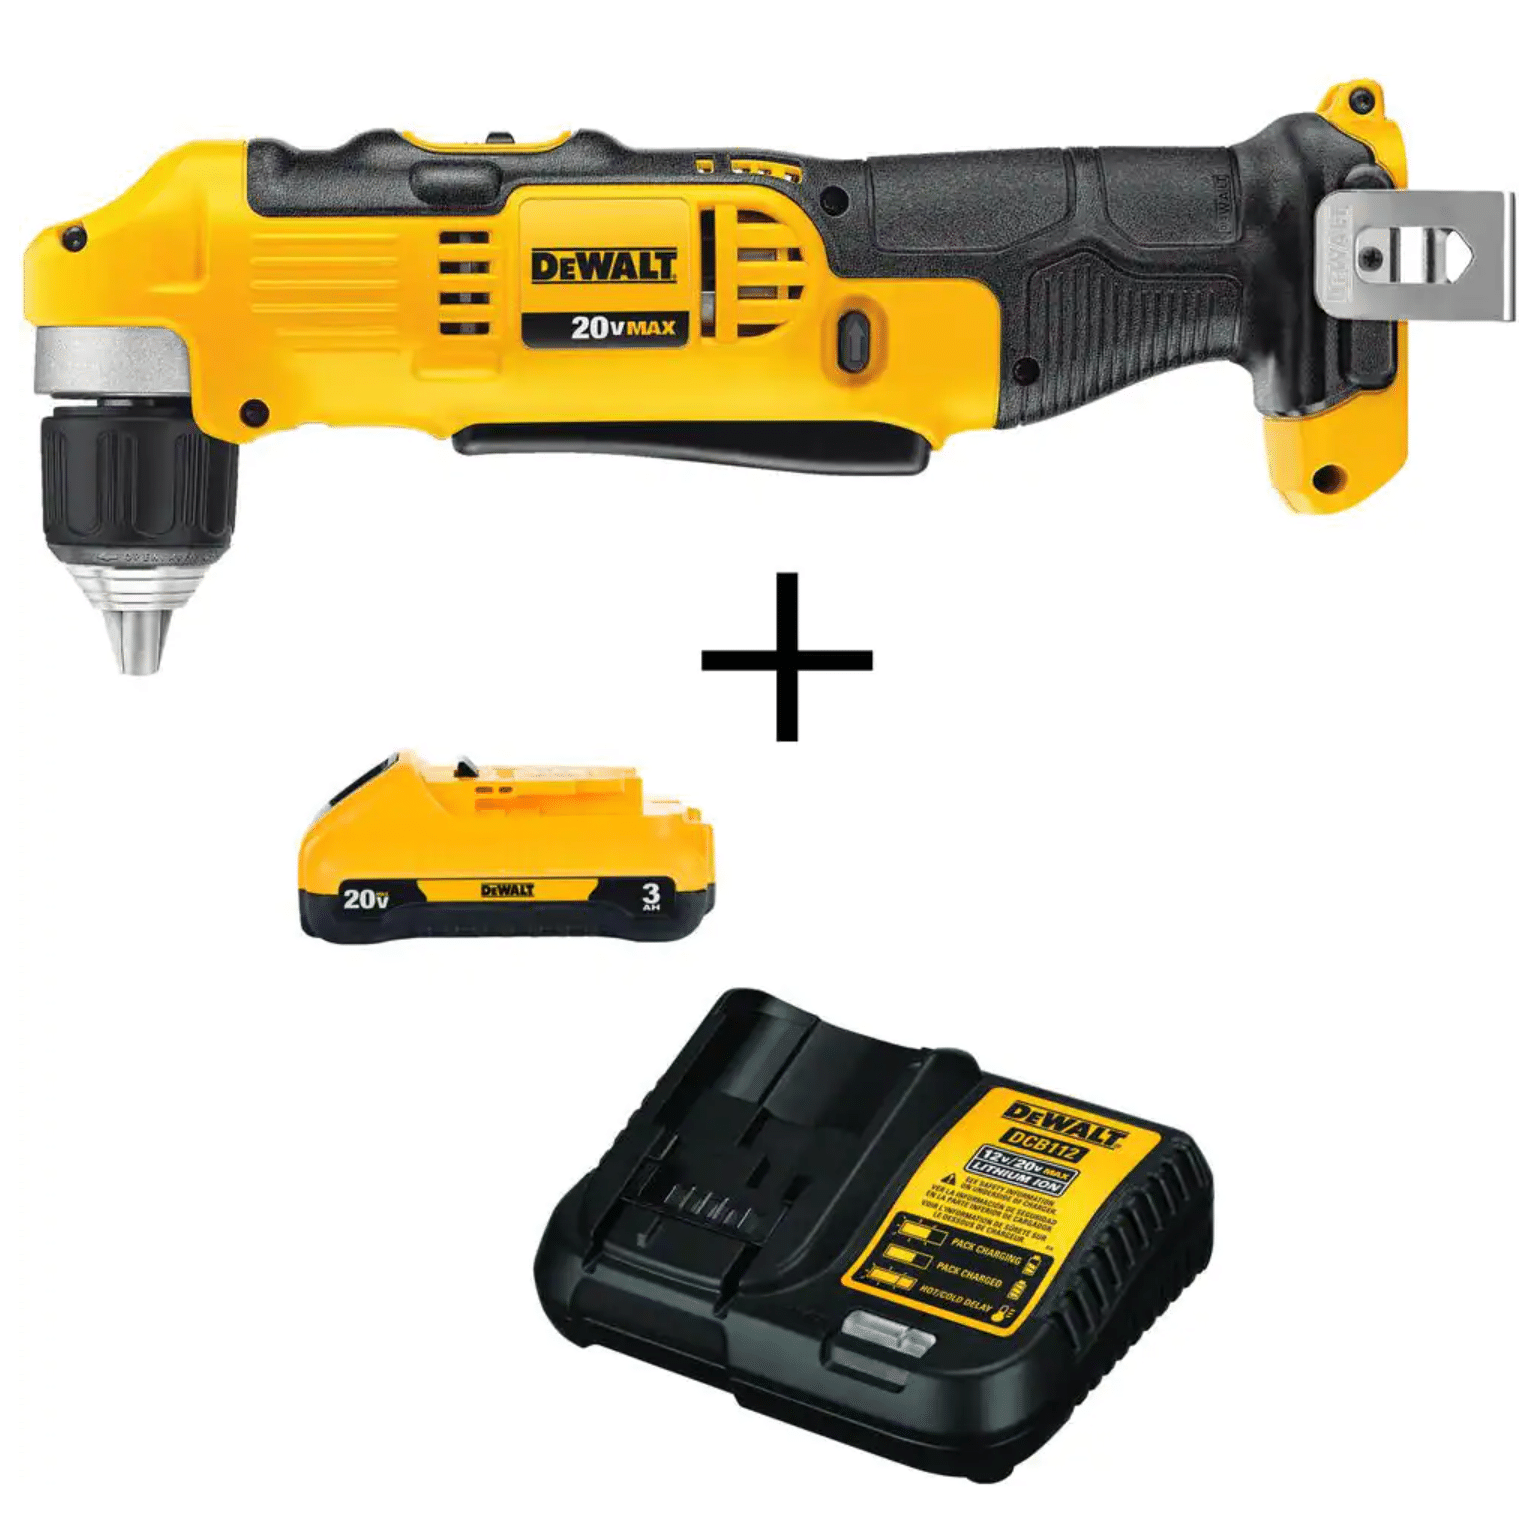 Dewalt 20-Volt Max Cordless 3/8 in. Right Angle Drill/Driver, 20-Volt 3.0Ah Battery & Charger (DCD740BW230C)